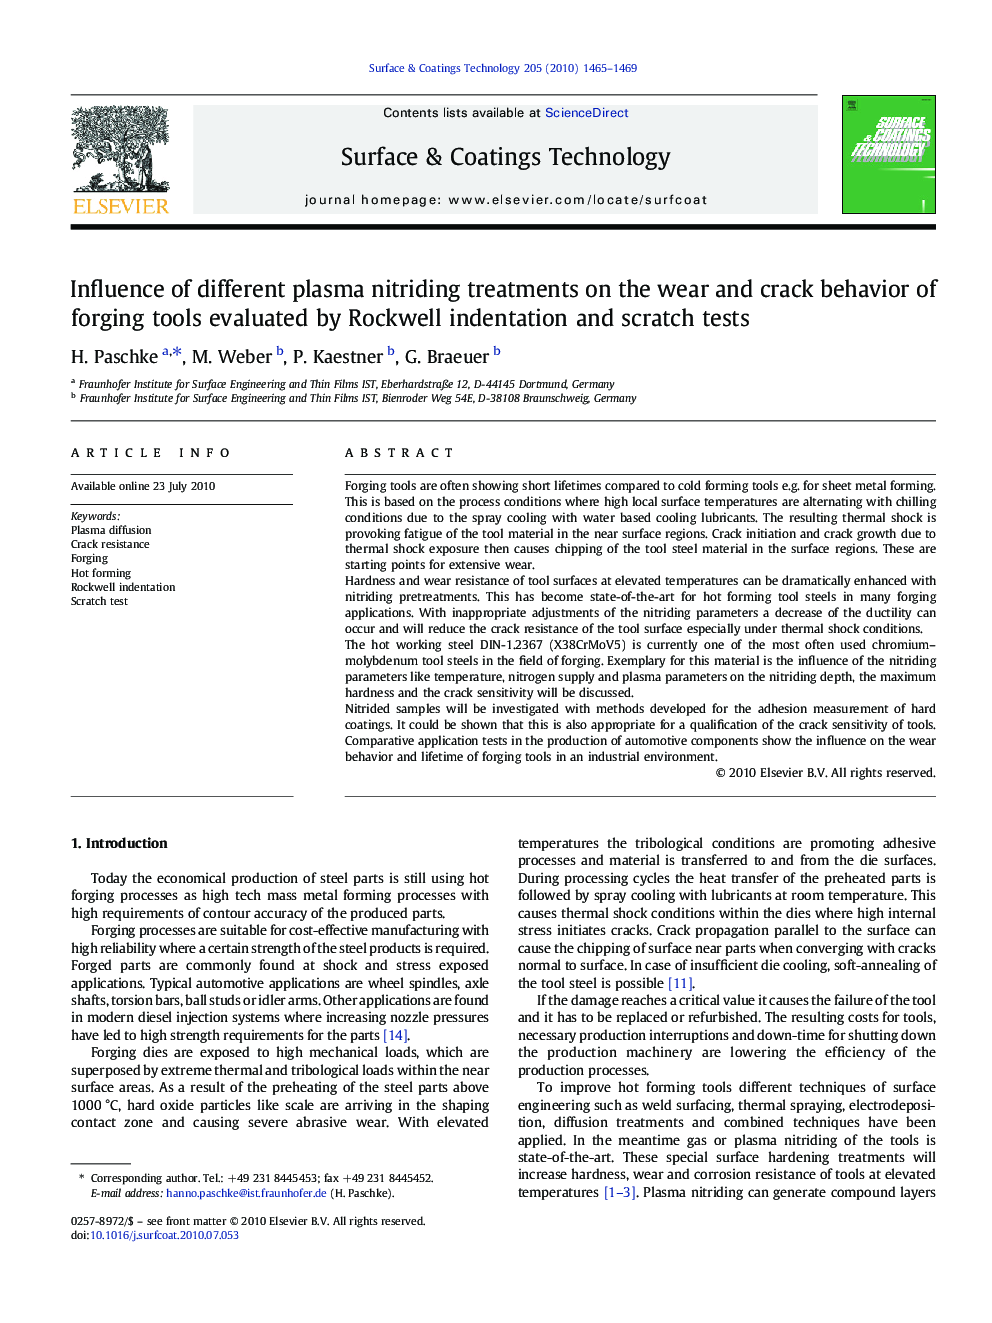 Influence of different plasma nitriding treatments on the wear and crack behavior of forging tools evaluated by Rockwell indentation and scratch tests